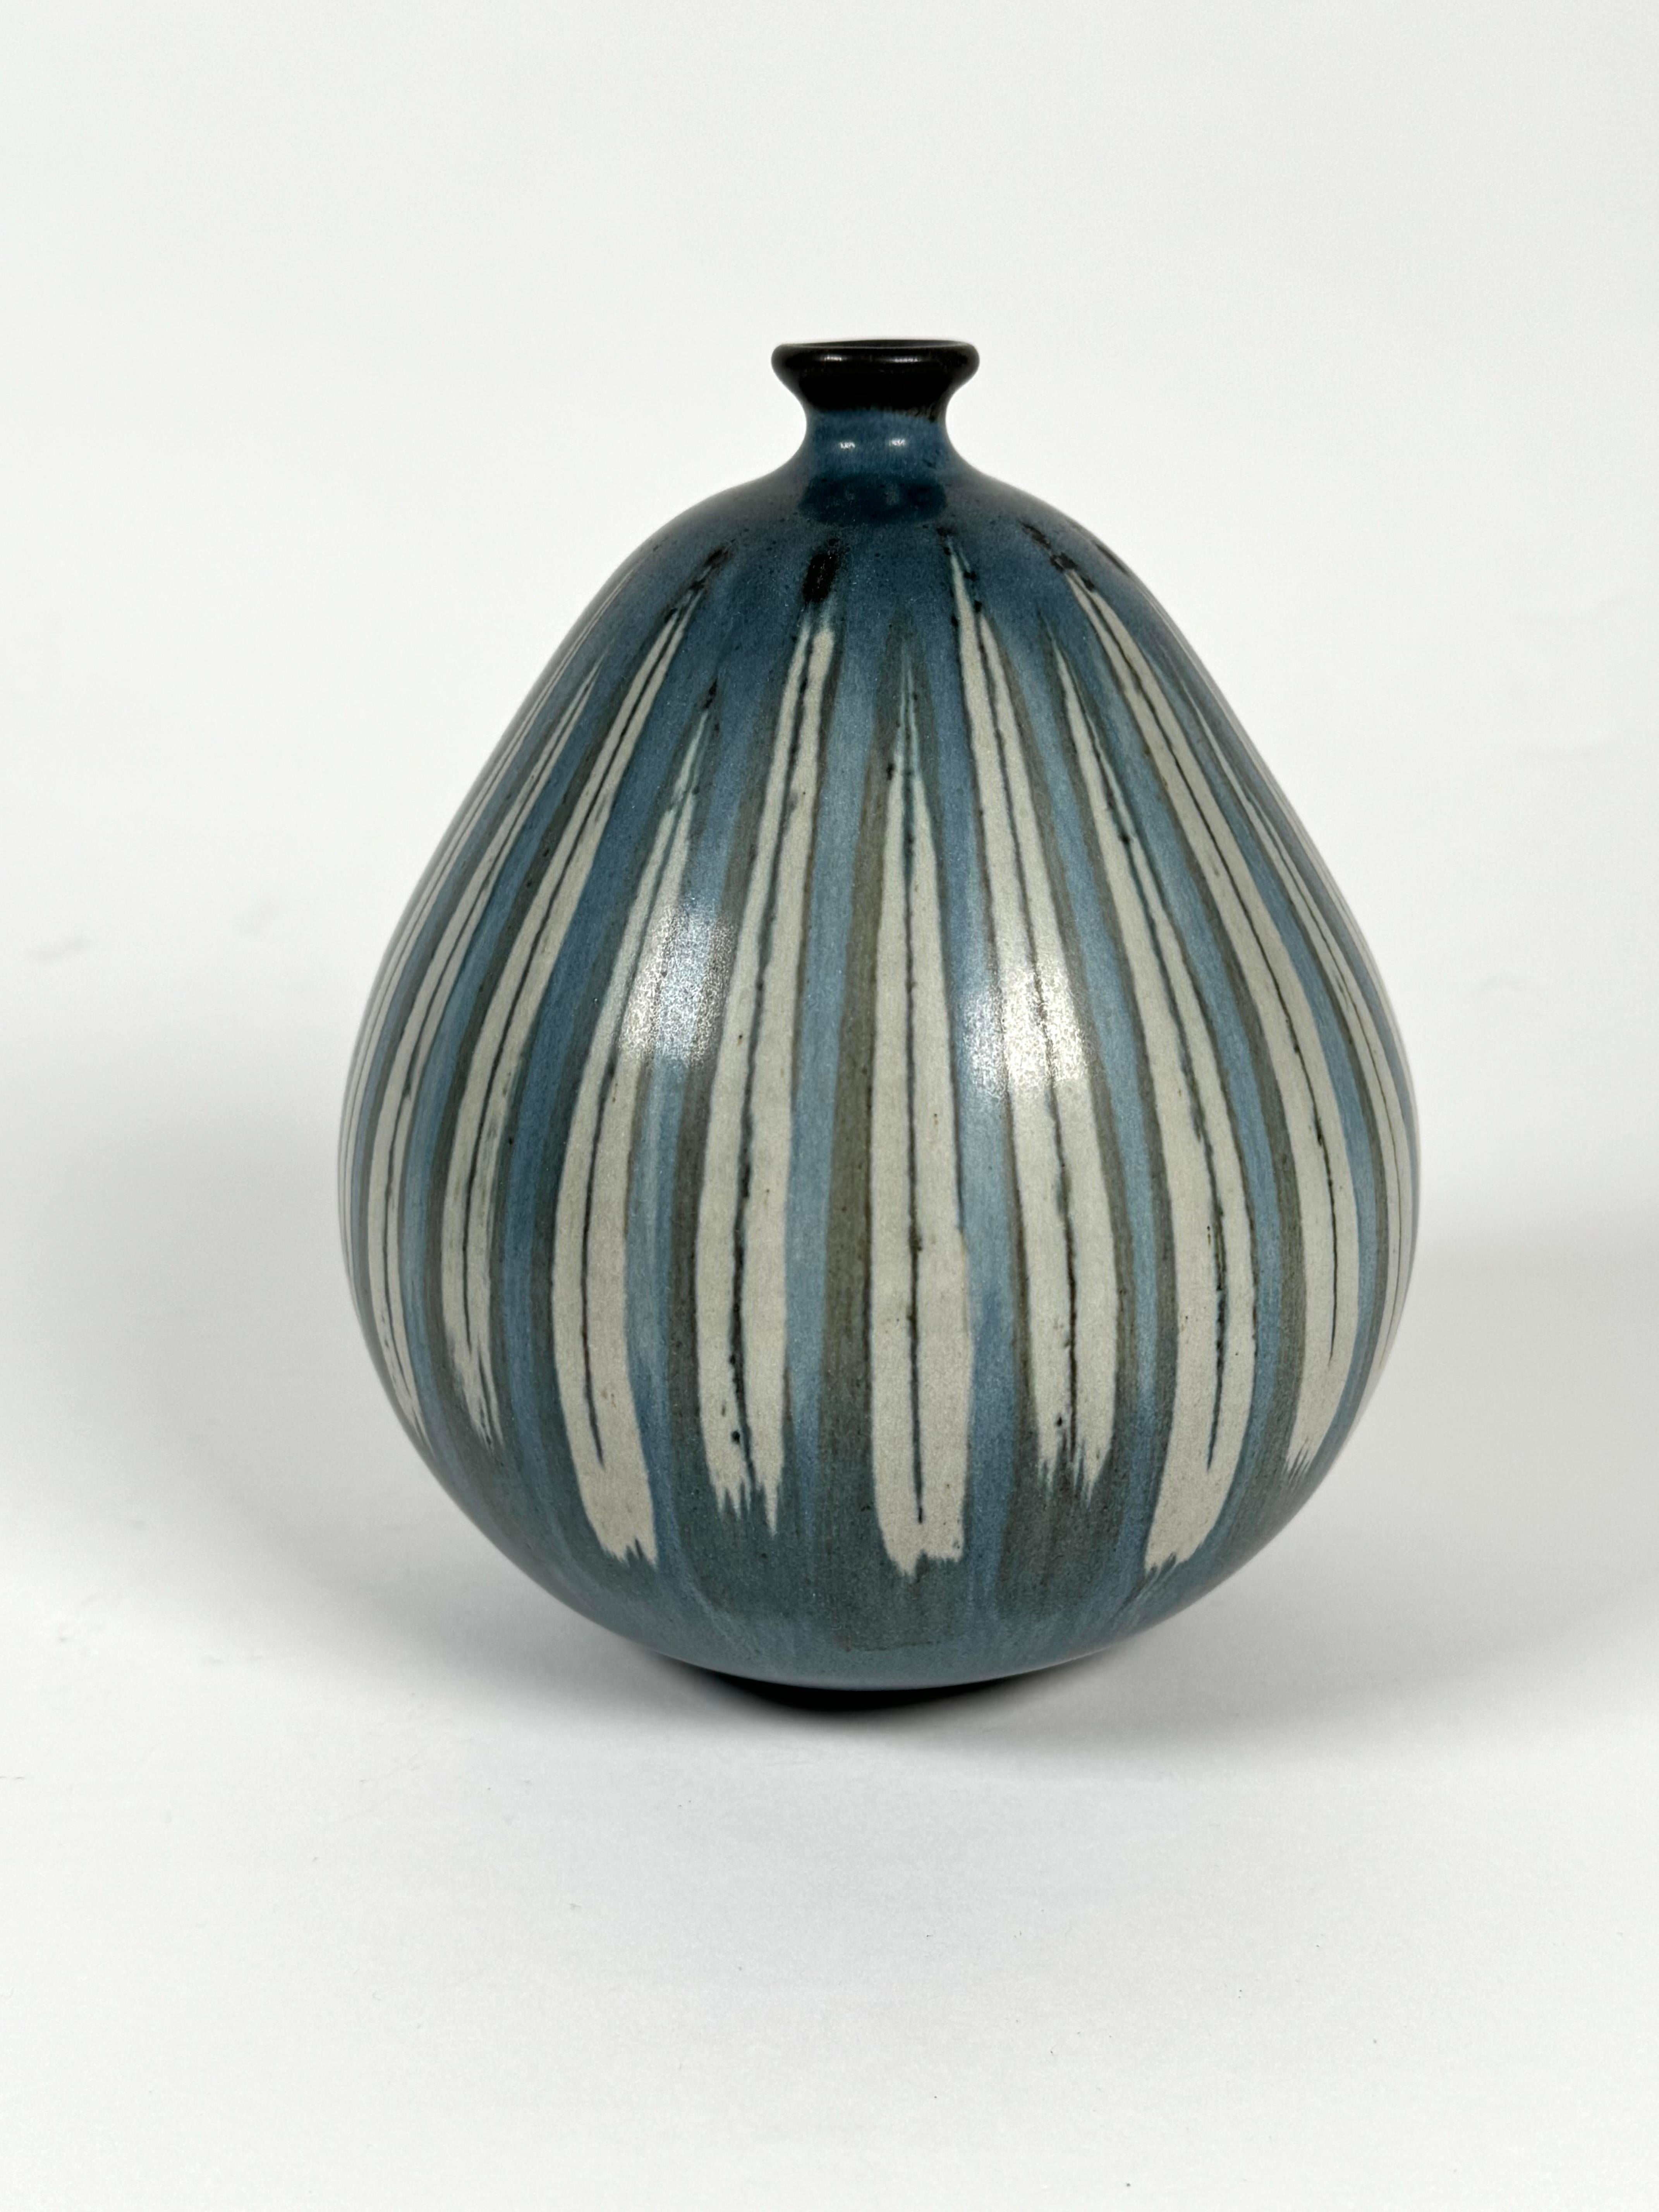 California studio ceramic artist Rupert Deese (1924-2010). Bulbous ceramic vase with blue tones with striped patterned glaze embellishments. Deese was a noted ceramicist who won numerous awards over the course of his career.